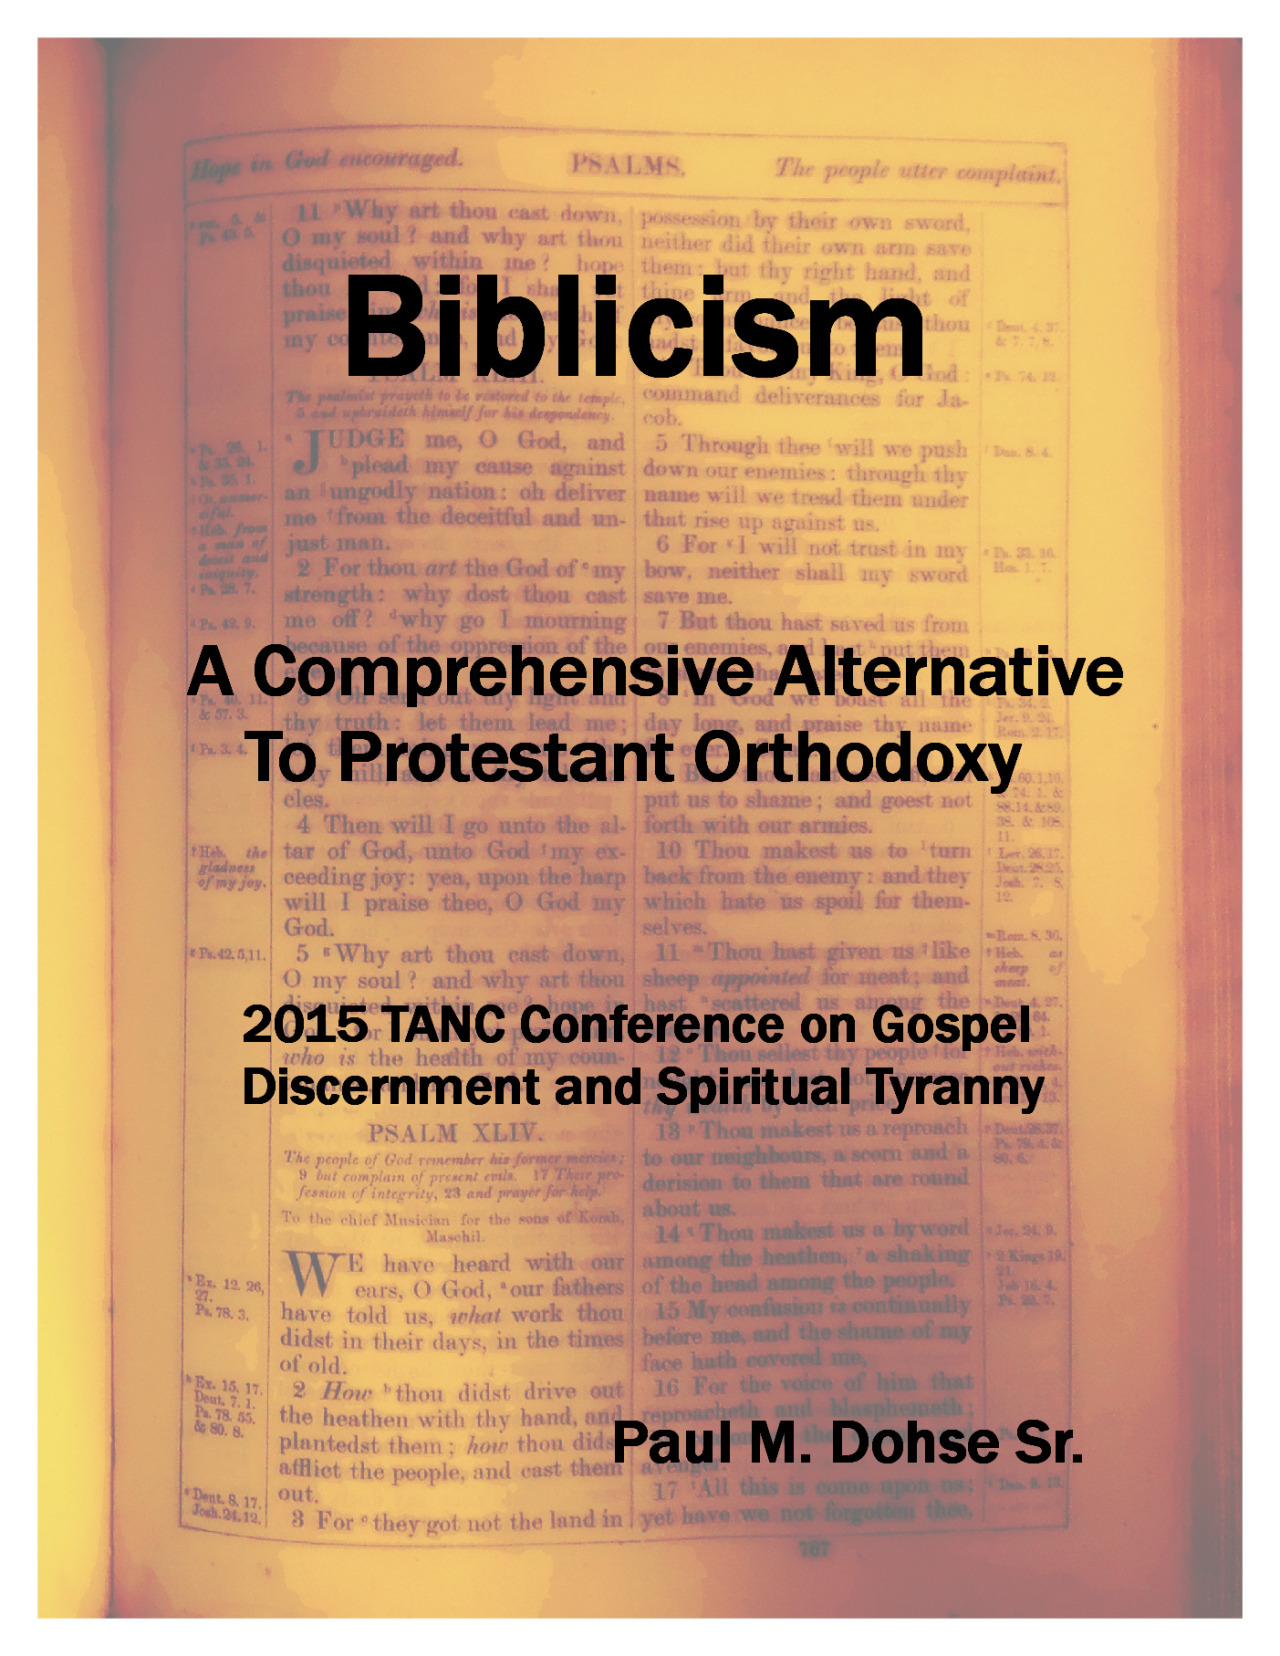 An Introduction to TANC 2015: Why the Protestant Reformation is a Lie
2015.ttanc.com Protestants don’t know anything. That’s not a derogatory remark, it’s merely a staple of Reformed ideology.